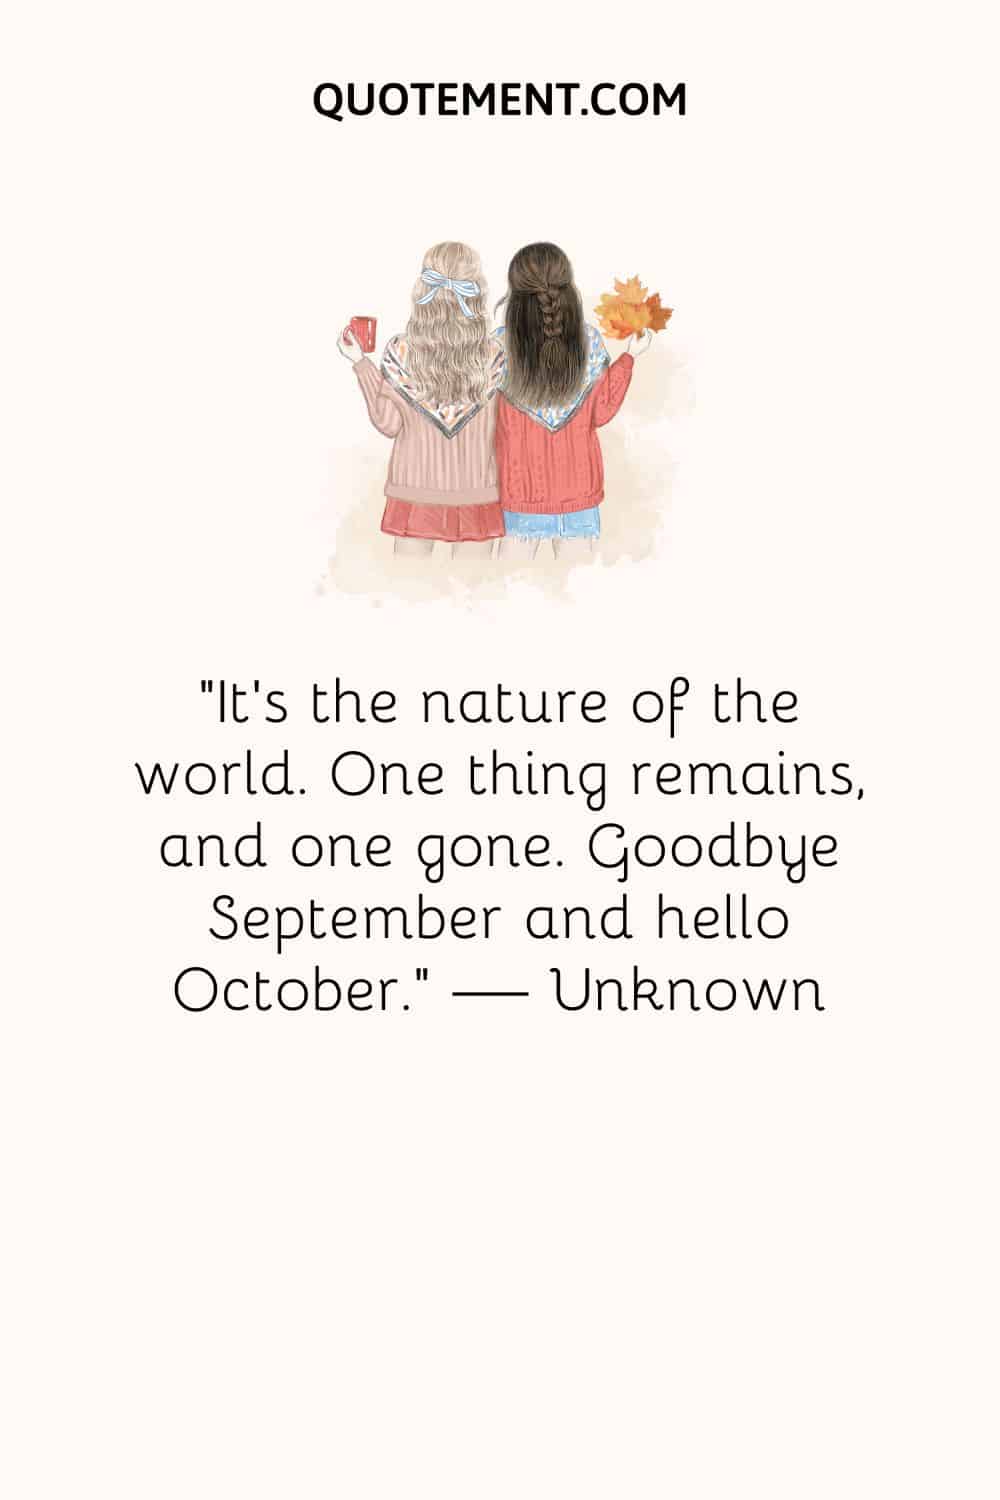 It’s the nature of the world. One thing remains, and one gone. Goodbye September and hello October.